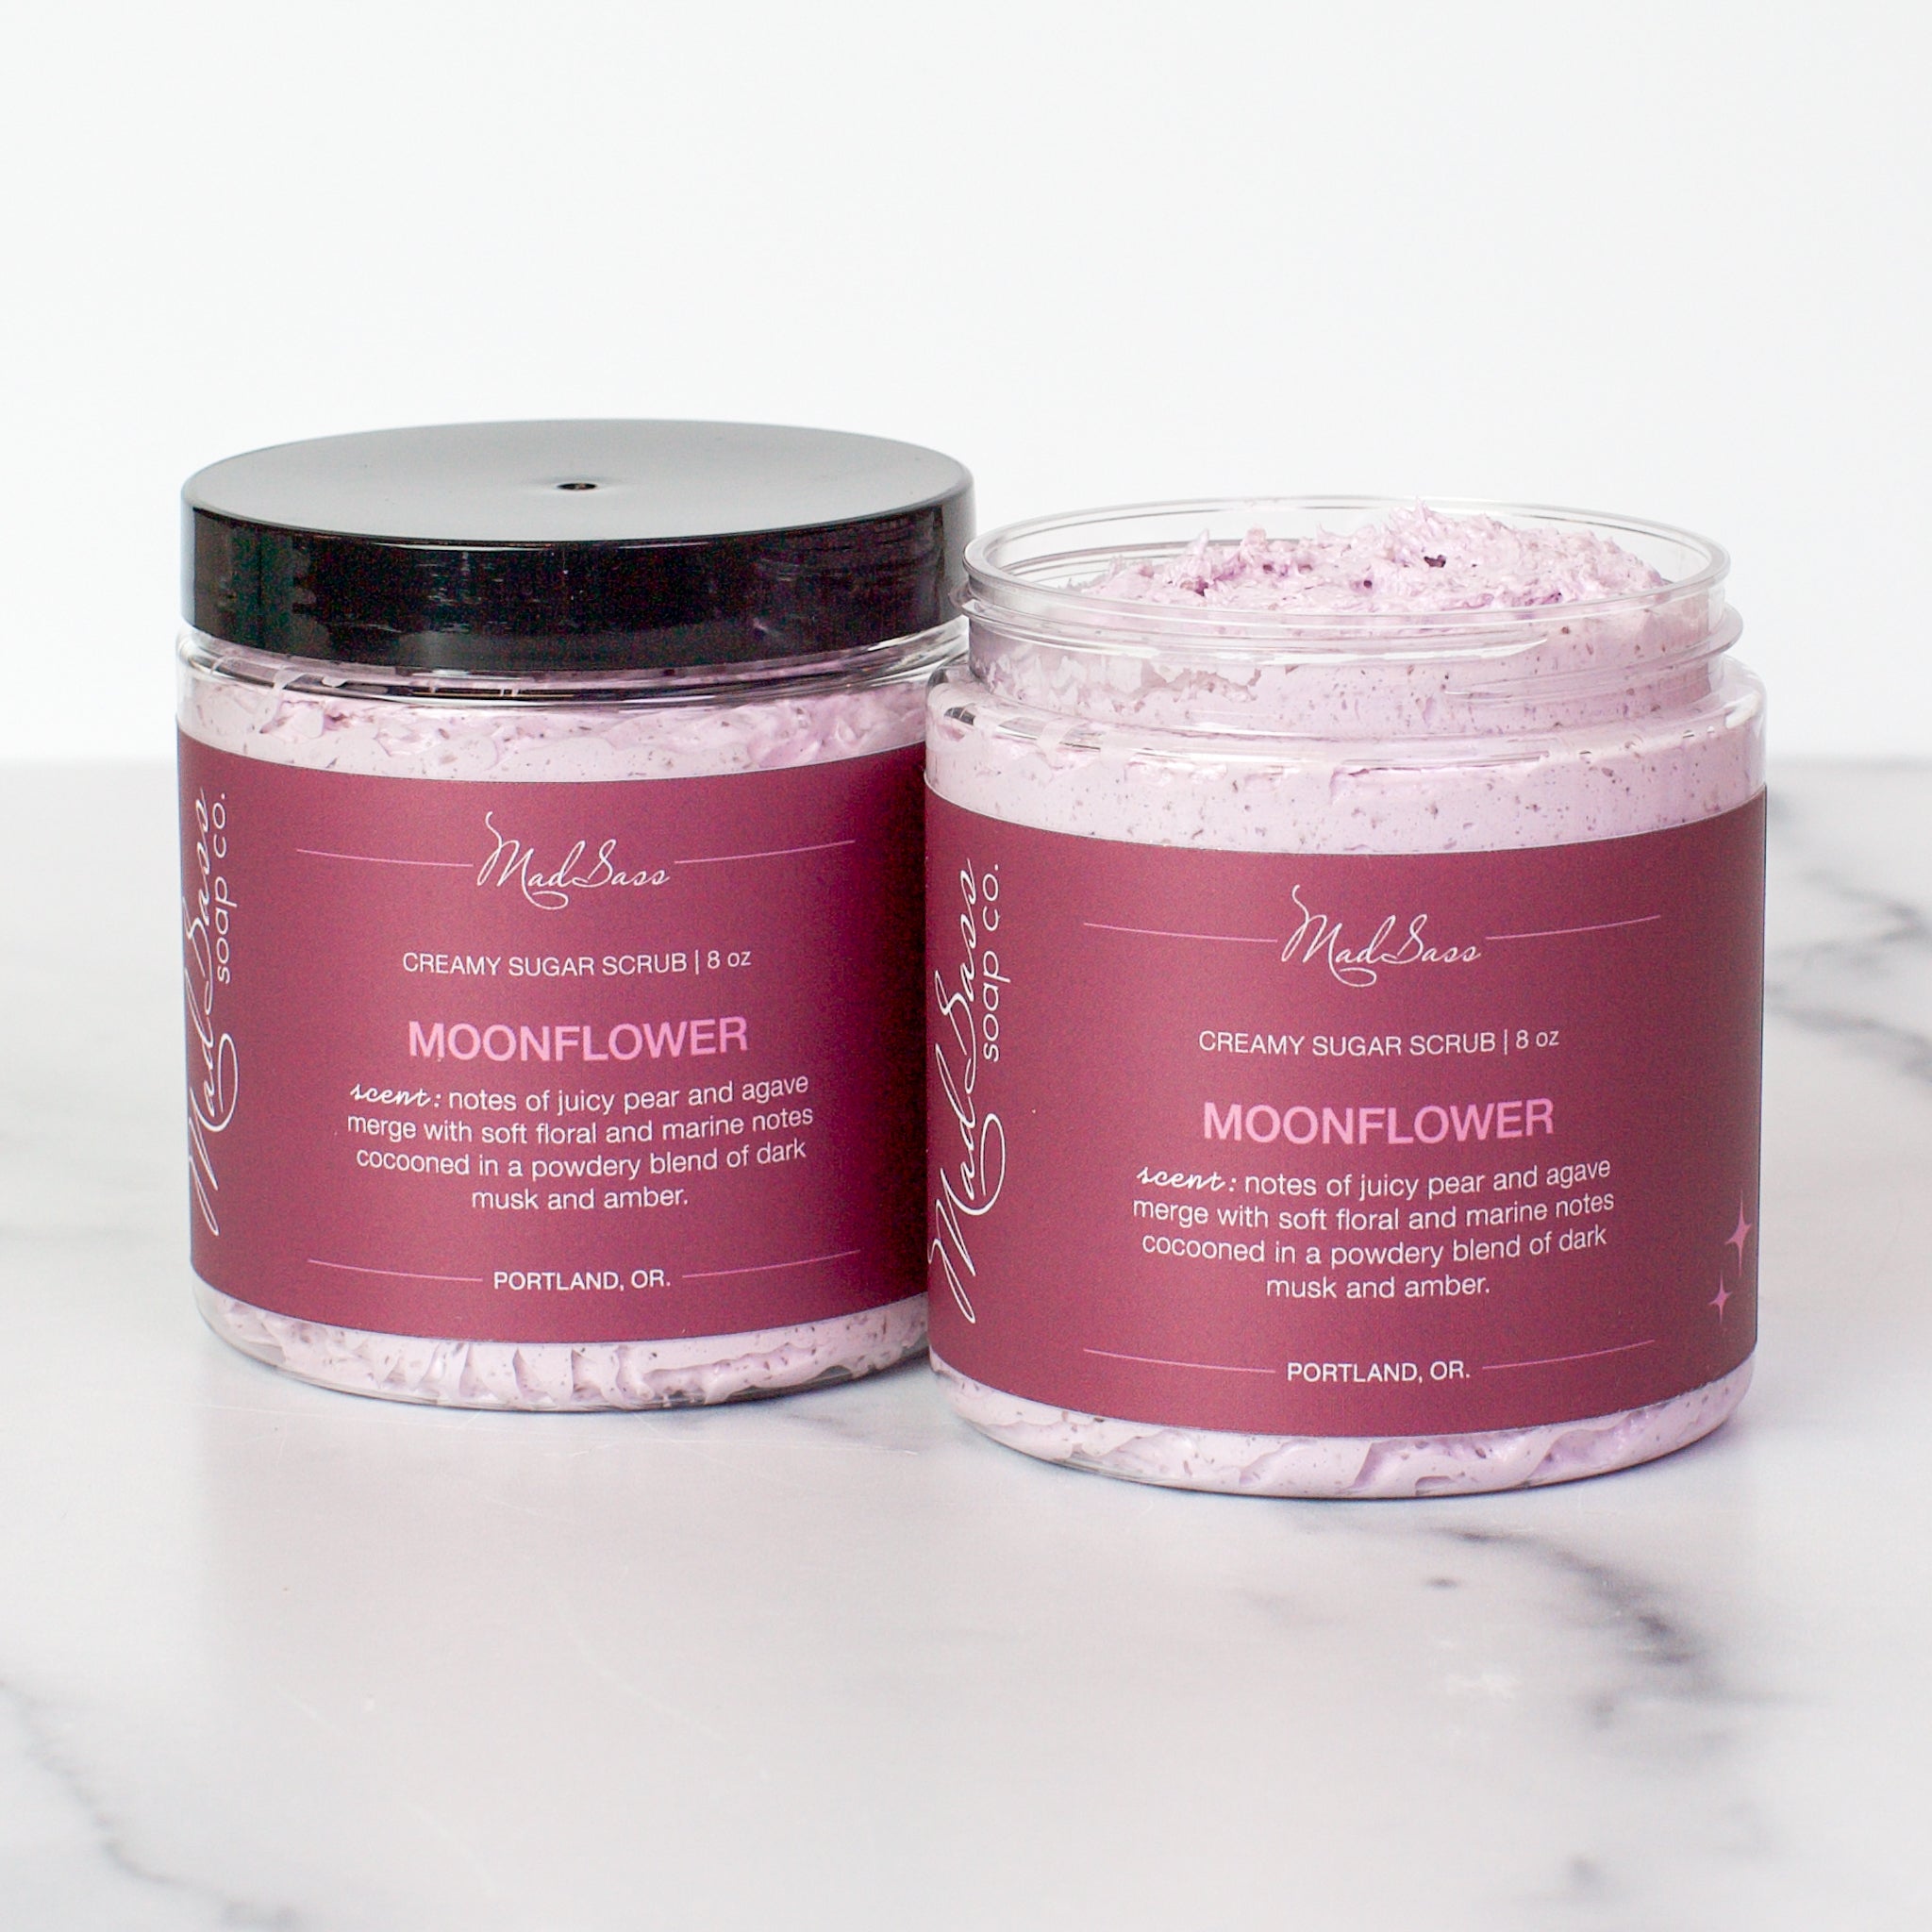 Two containers of Moonflower Creamy Sugar Scrubs on a white background. Moonflower is a light berry scrub in a clear tub with a black lid.